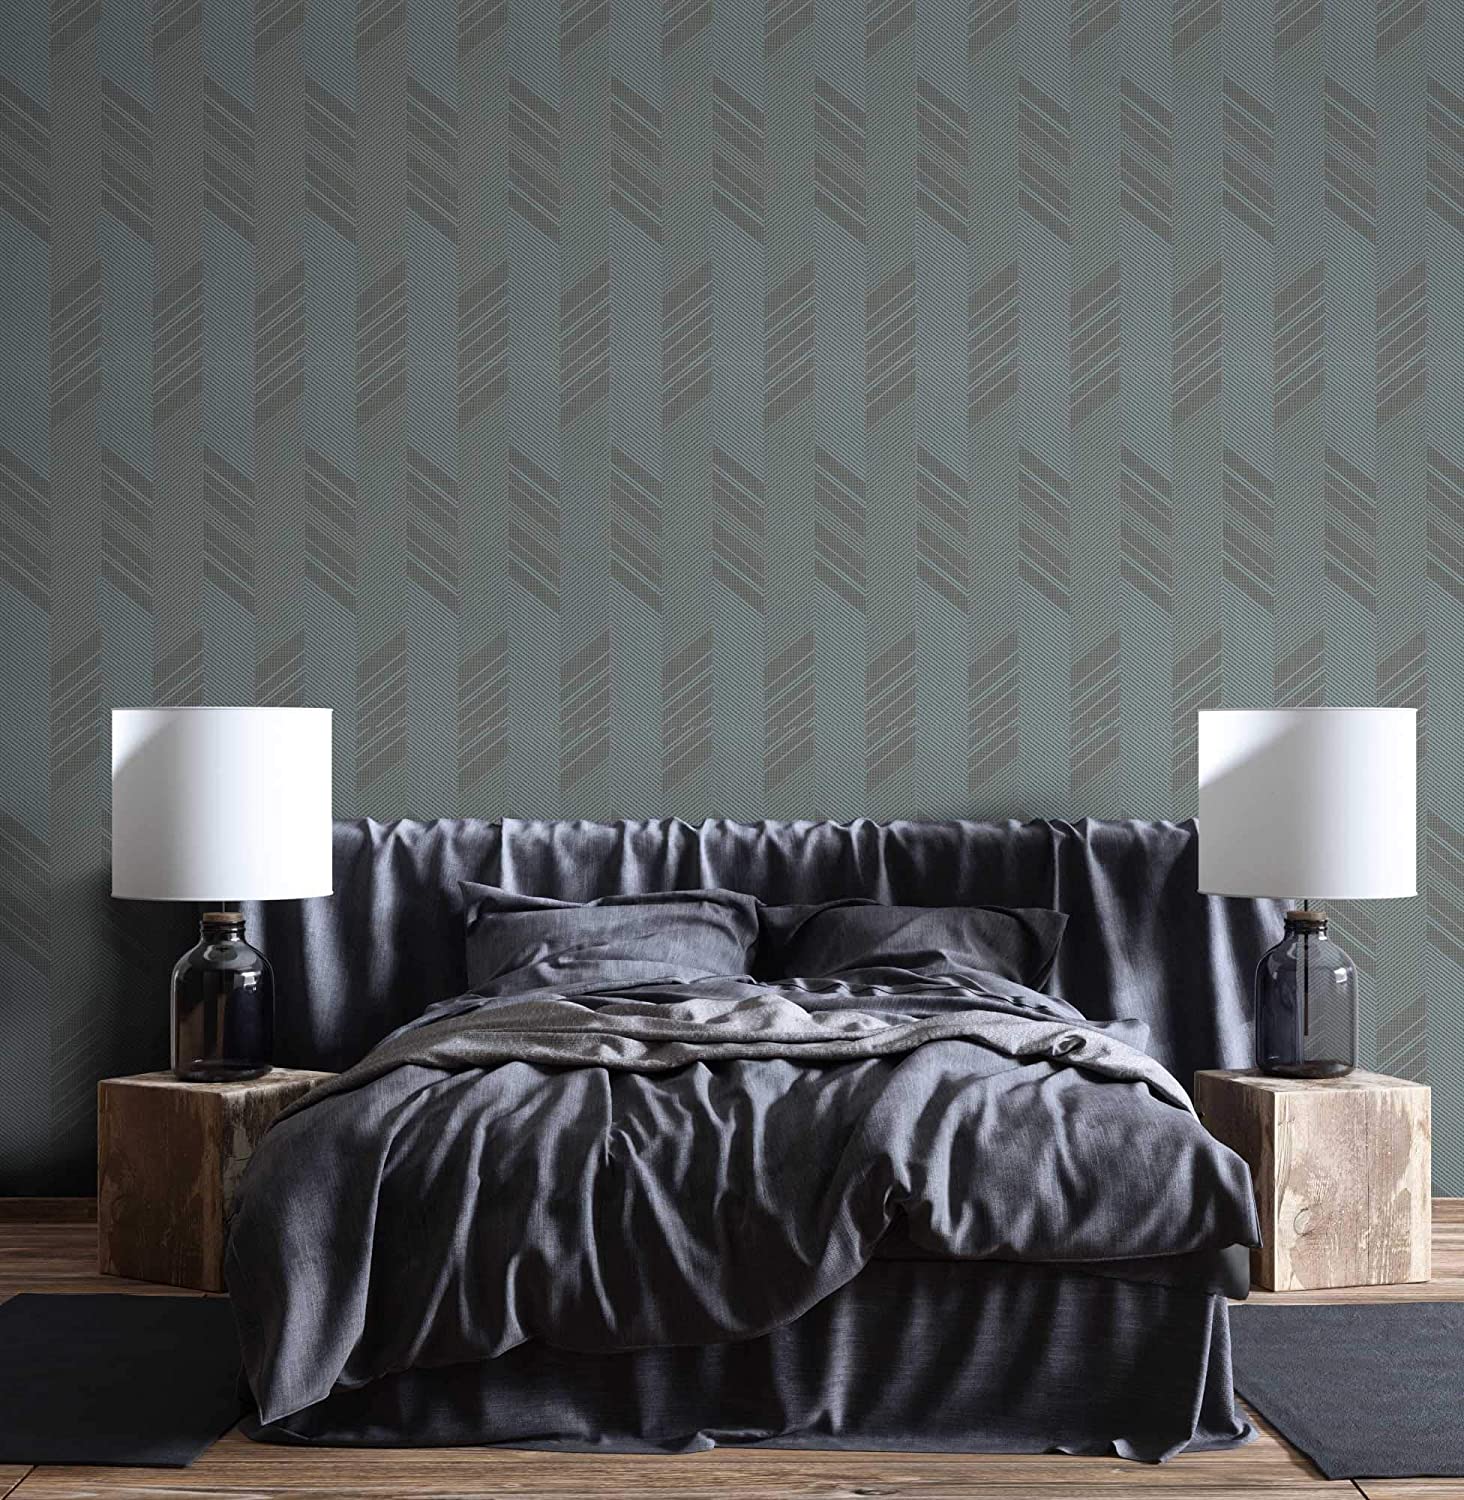 Newroom Graphic Grey Geometric Graphic Graphic Non-Woven Wallpaper Modern Including Wallpaper Guide Graphic